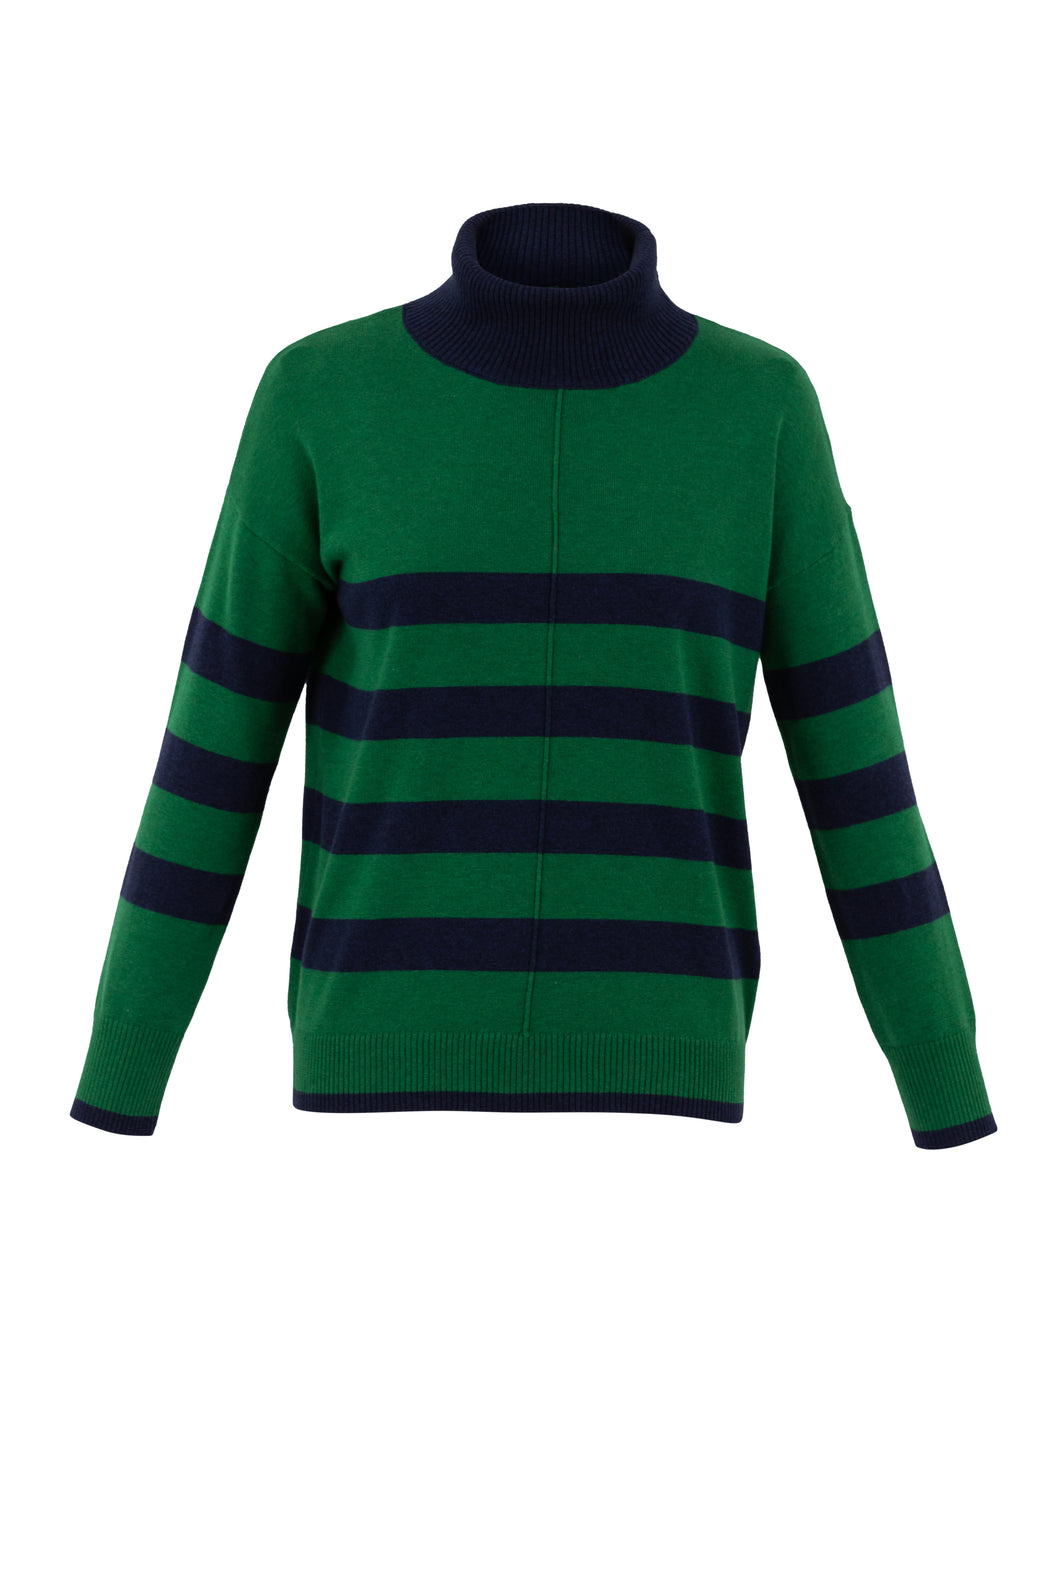 Marble Green Navy Stripe Cowl Neck Sweater - 100% Cotton